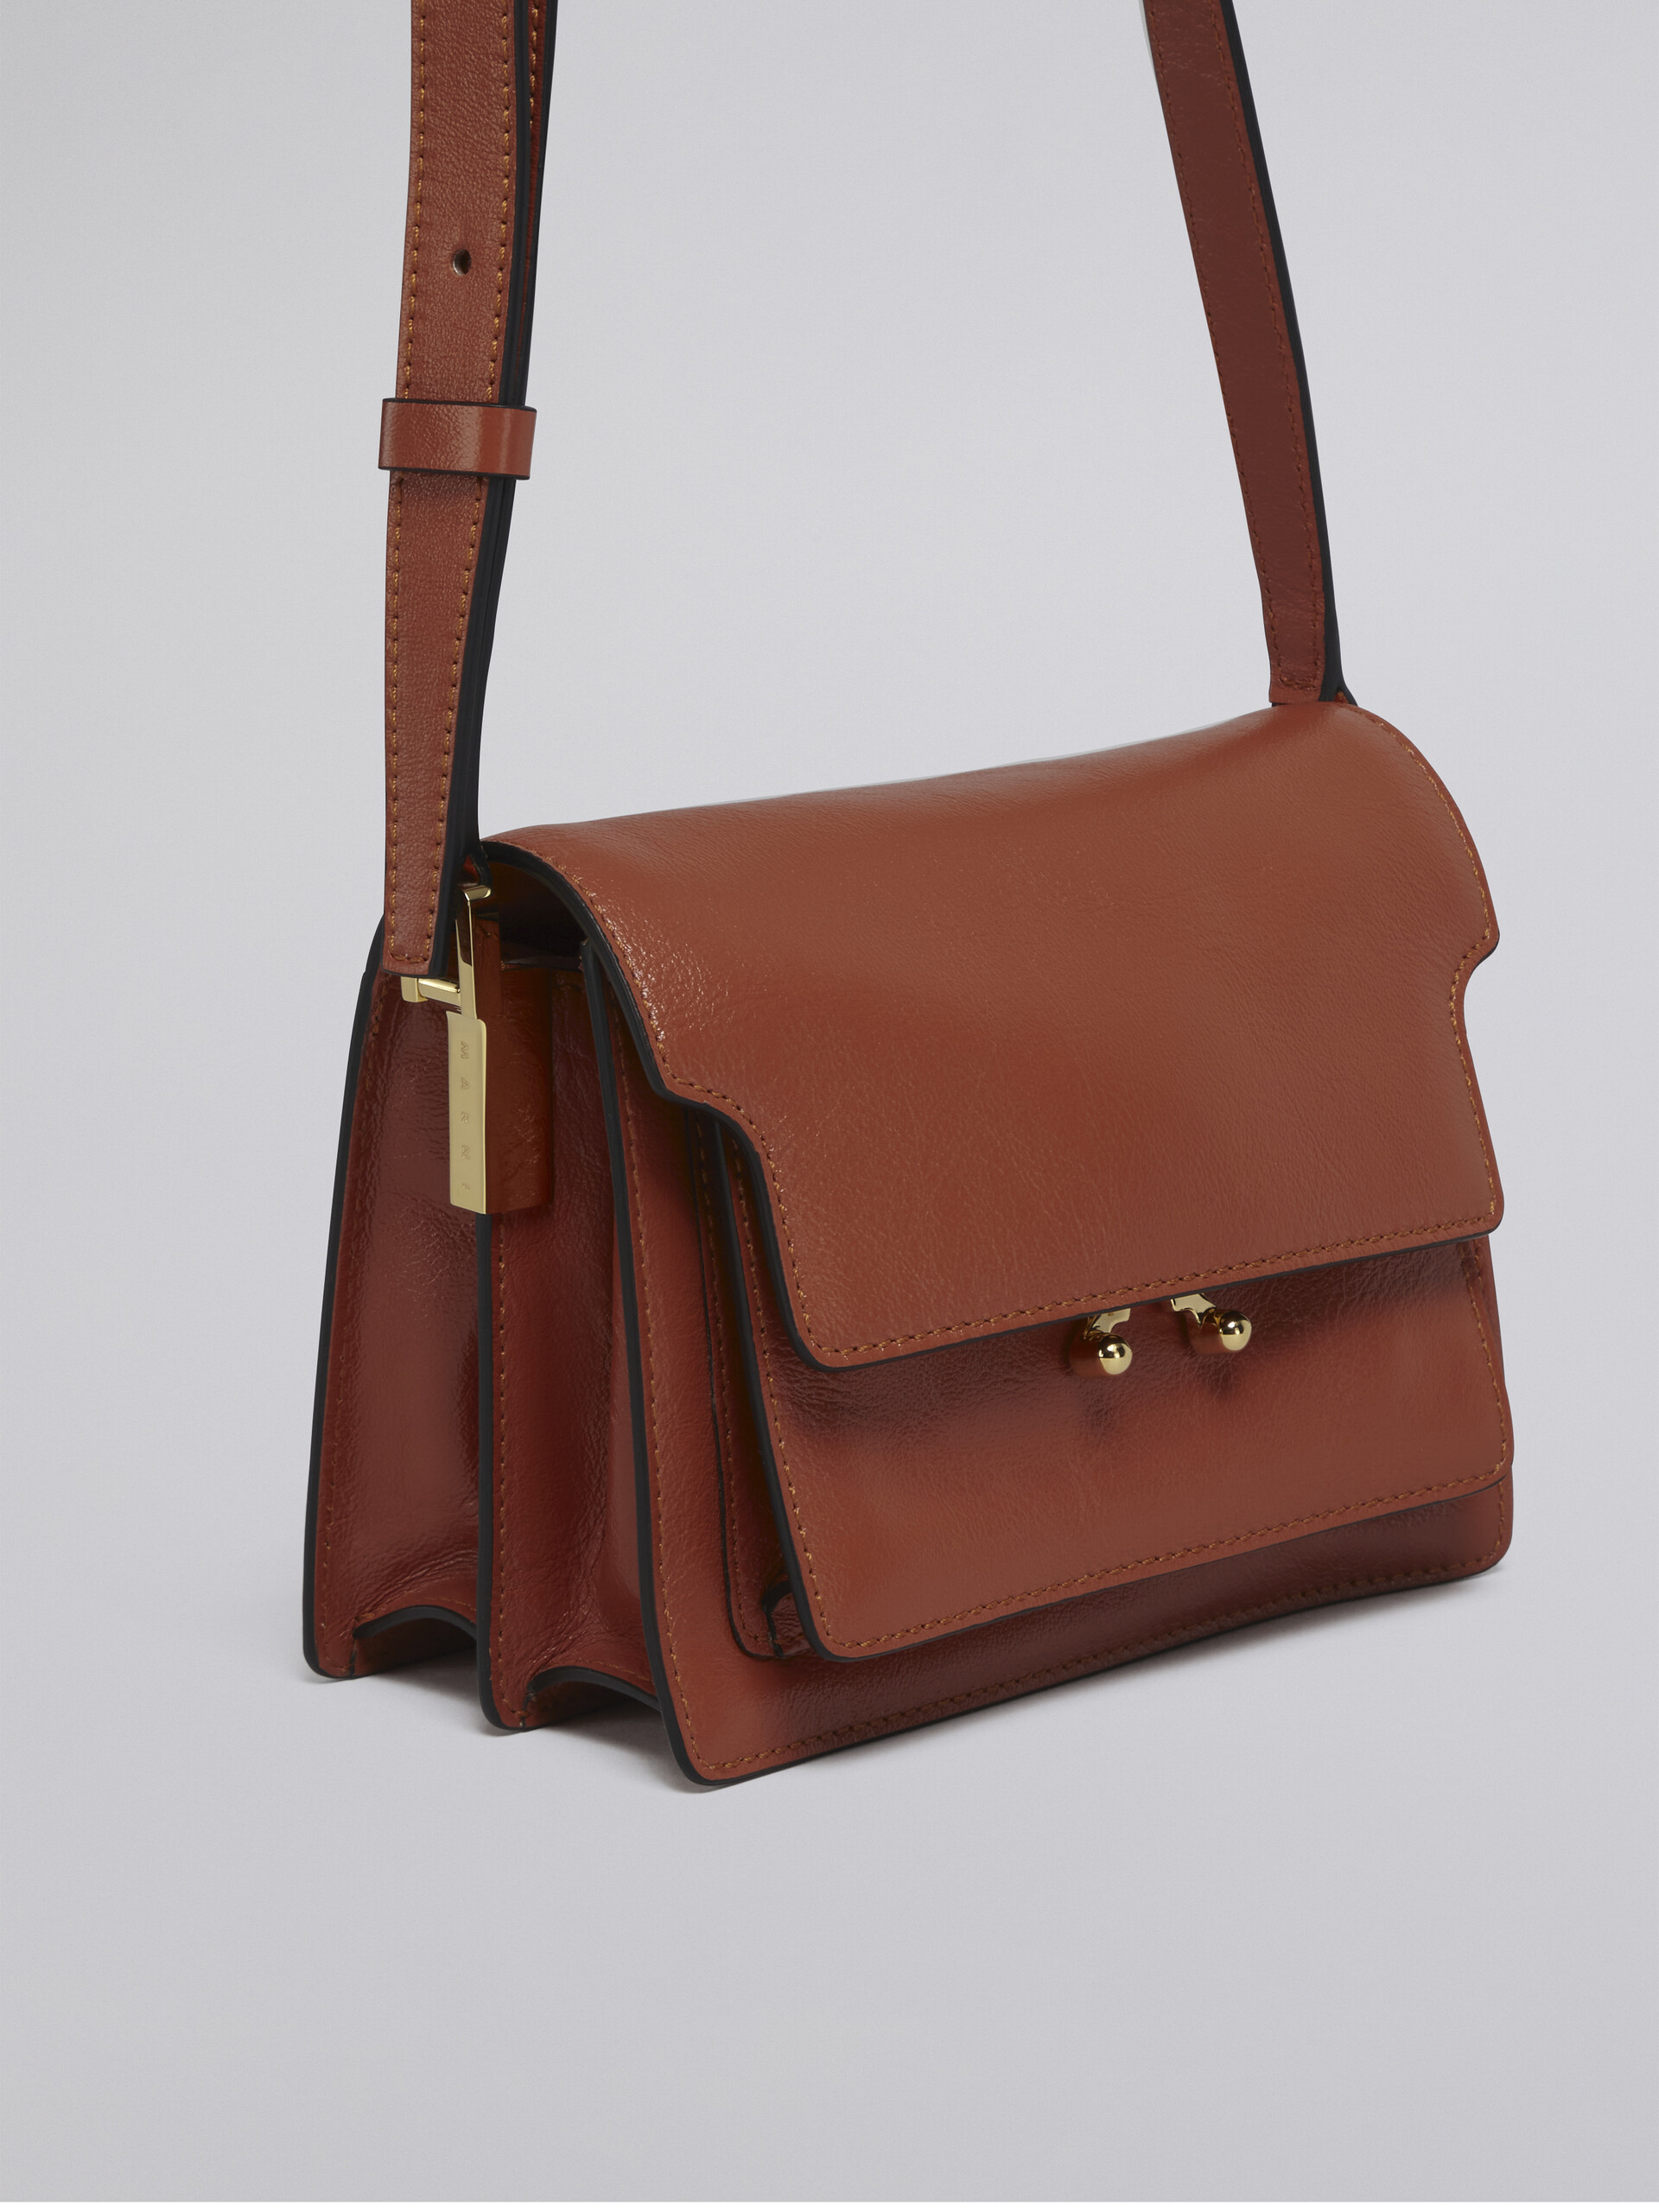 TRUNK SOFT mini bag in brown leather - Shoulder Bags - Image 5